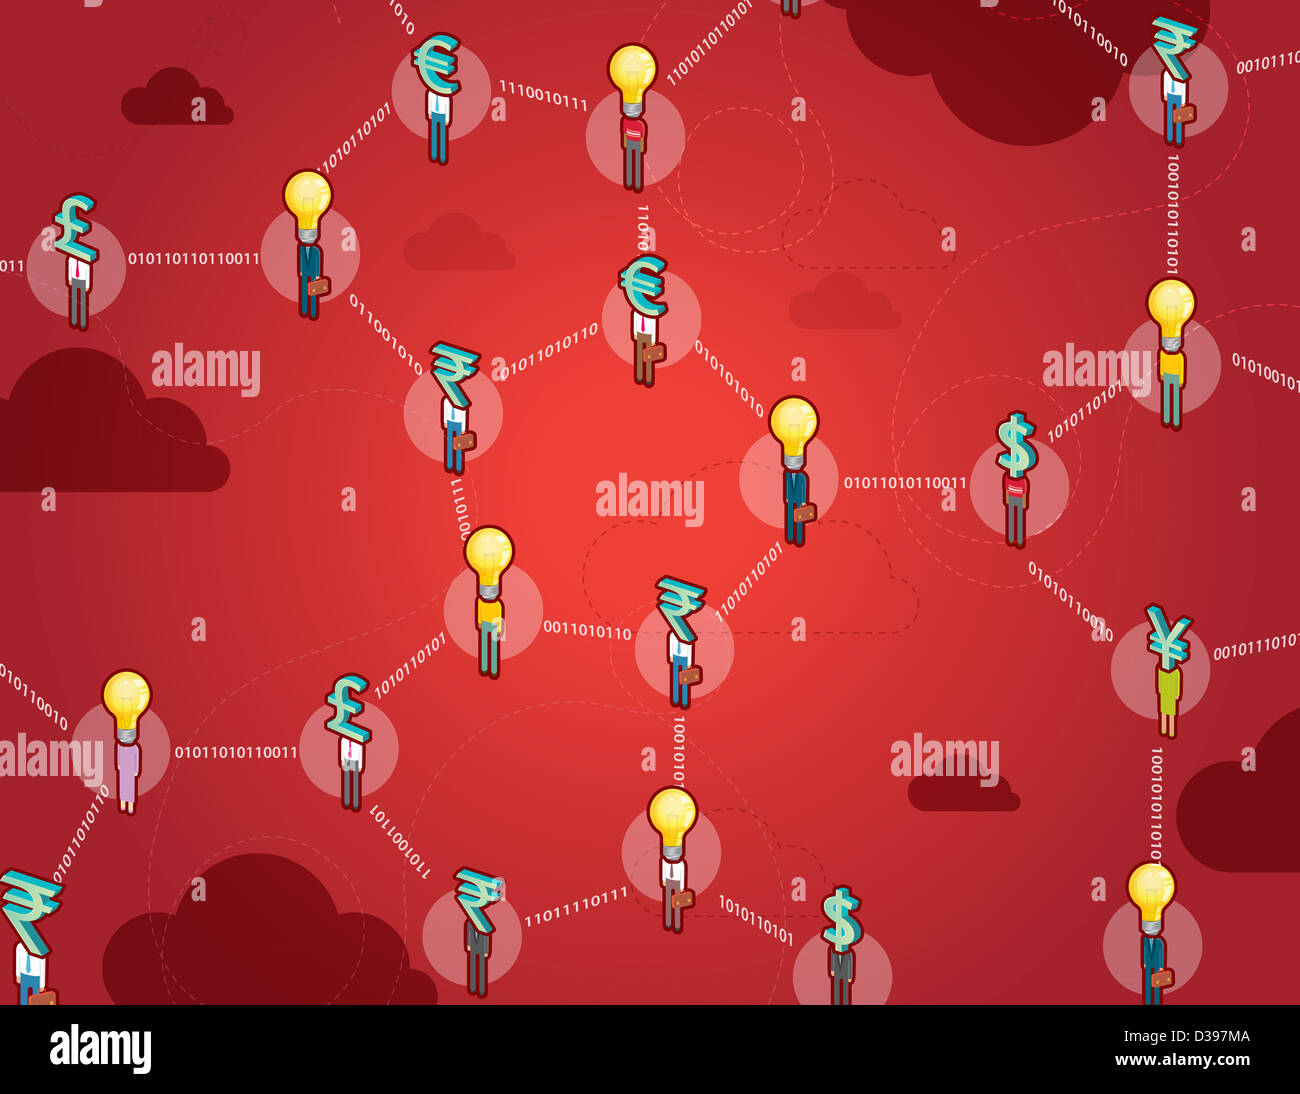 Currencies with light bulbs in DNA structure over red background depicting business network Stock Photo